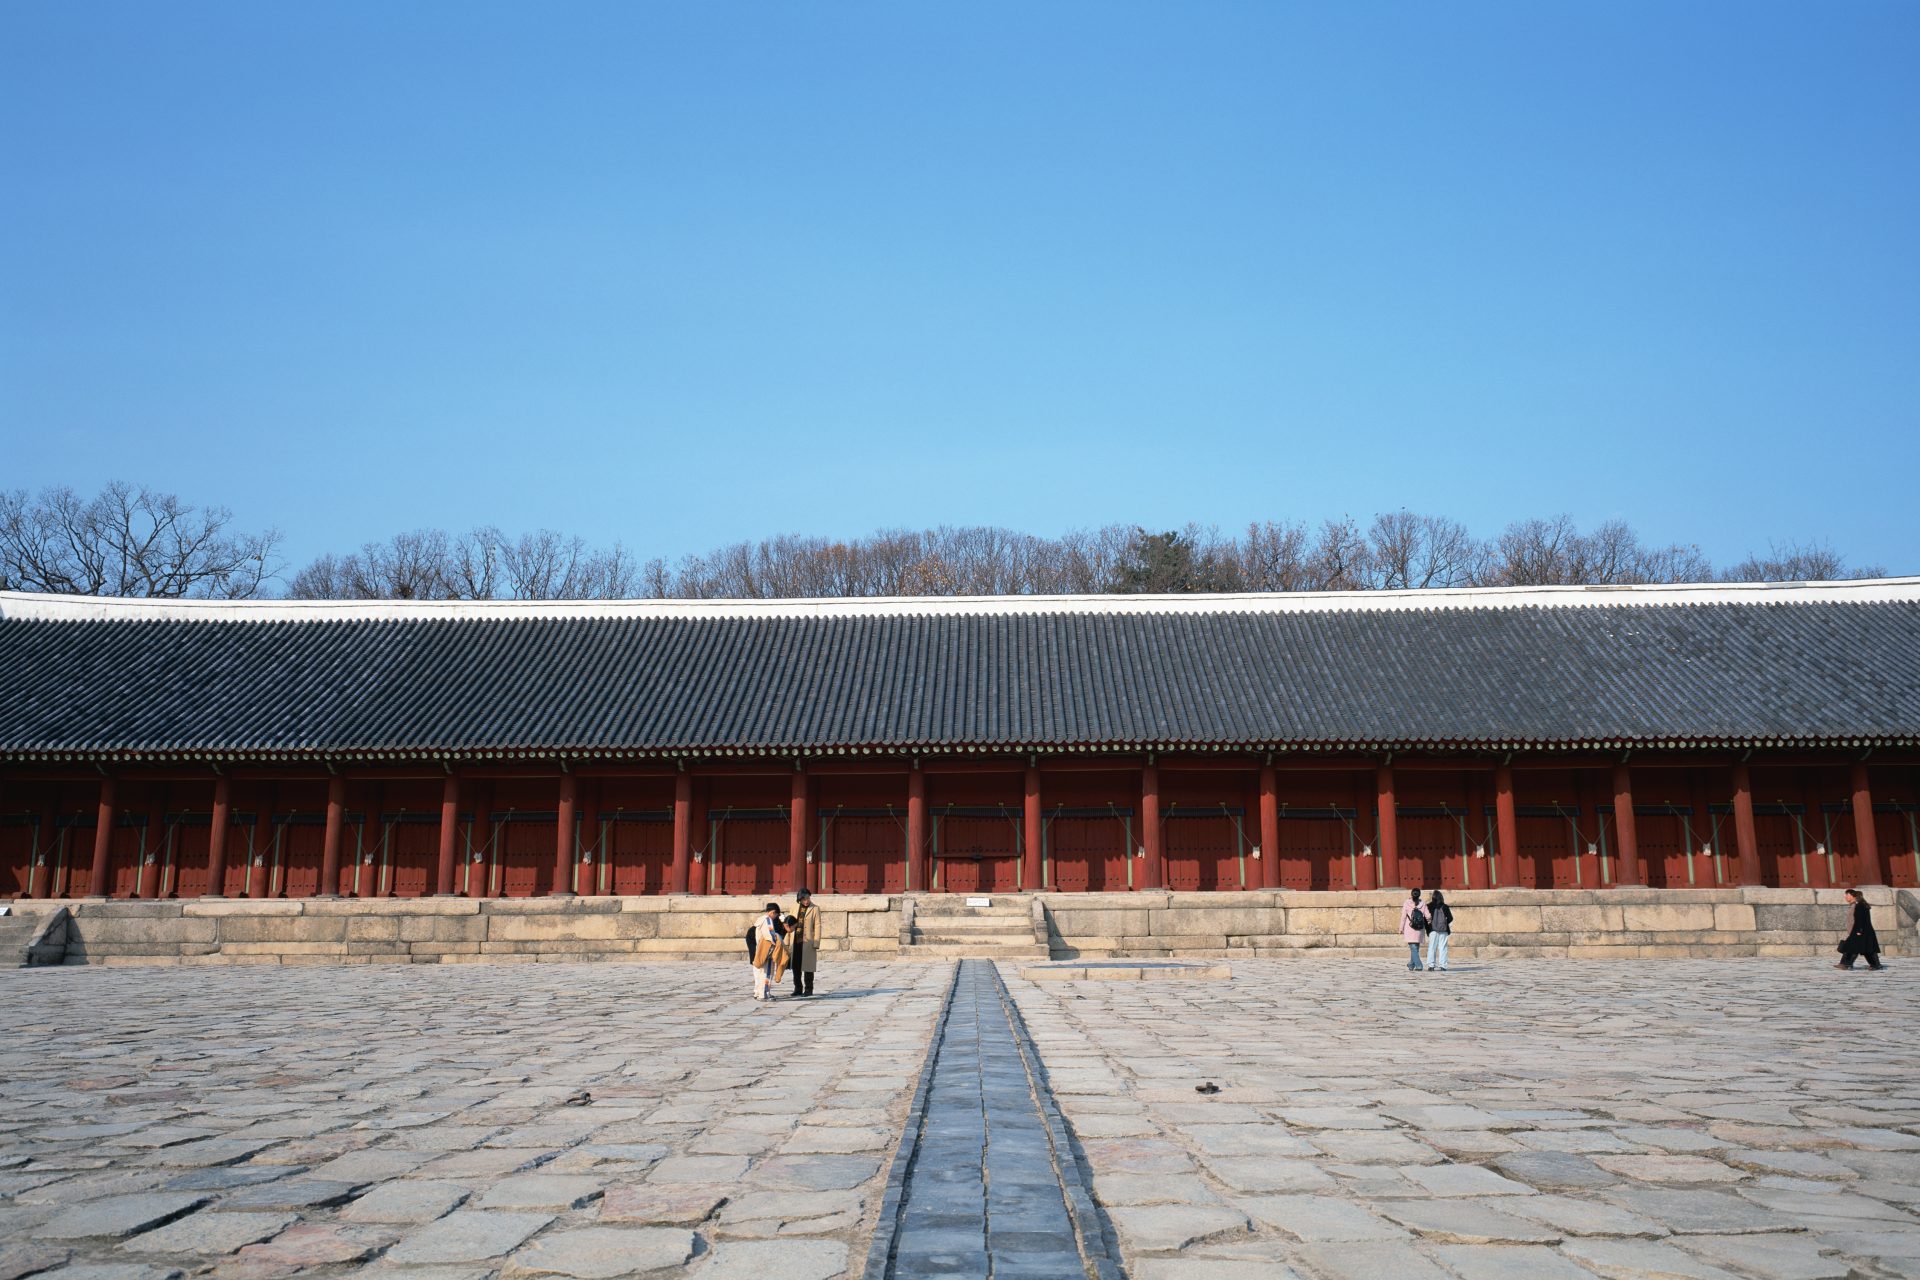 <p>This mausoleum was built in 1394, and the tablets of the Joseon Dynasty's kings and royal family members are enshrined here. At 101m (331.36 ft) long, it is the longest wooden structure among the existing shrines.</p>